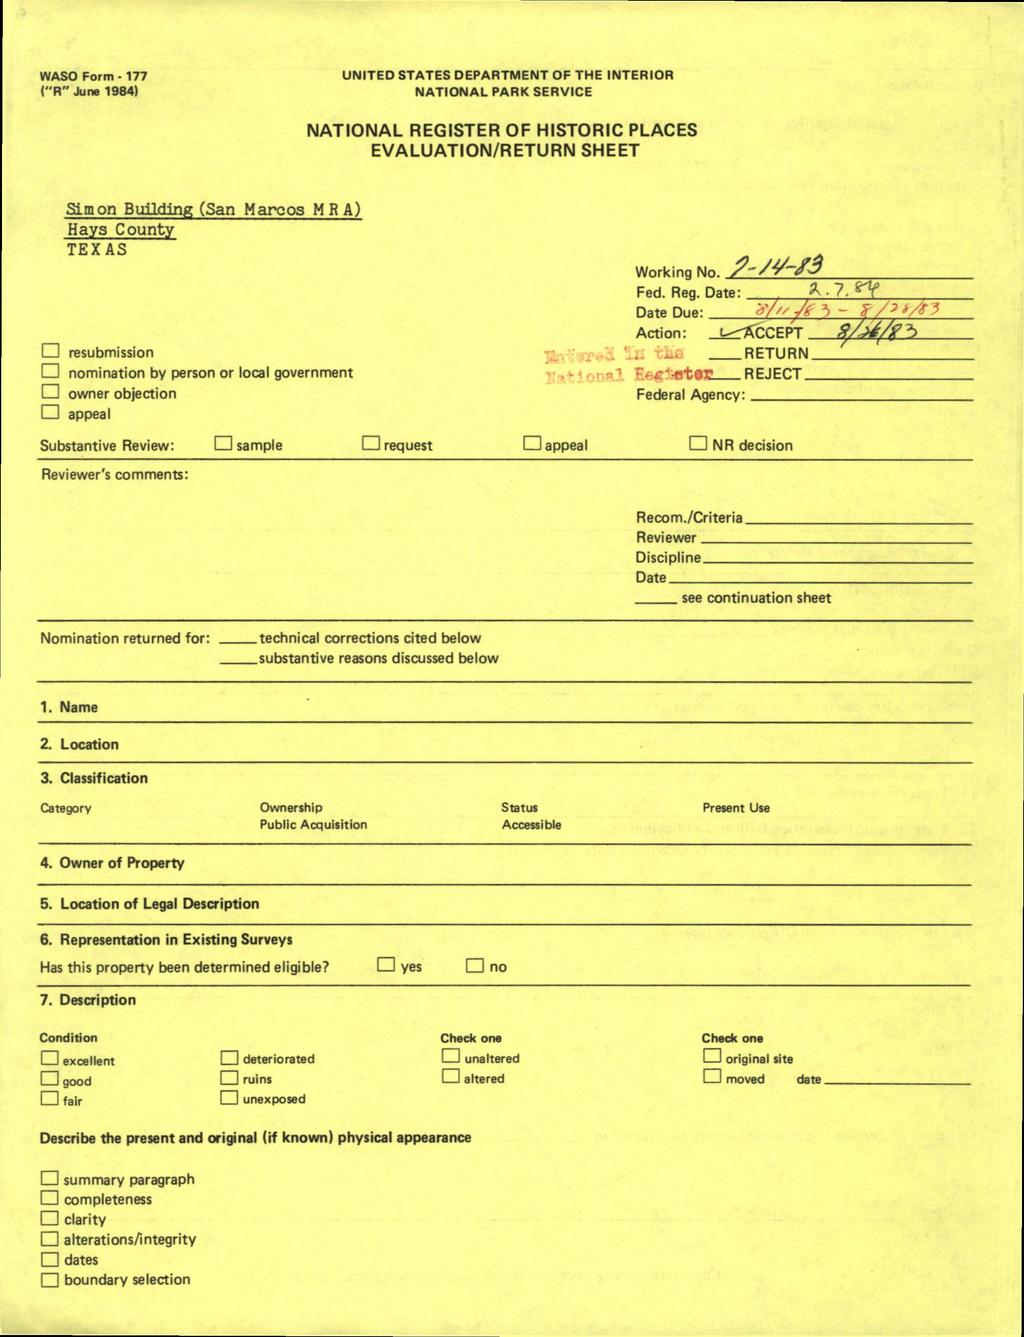 WASO Form -177 ("R" June 1984) UNITED STATES DEPARTMENT OF THE INTERIOR NATIONAL PARK SERVICE NATIONAL REGISTER OF HISTORIC PLACES EVALUATION/RETURN SHEET Simon BuHdlnp; (San Marcos MRA) Hays County